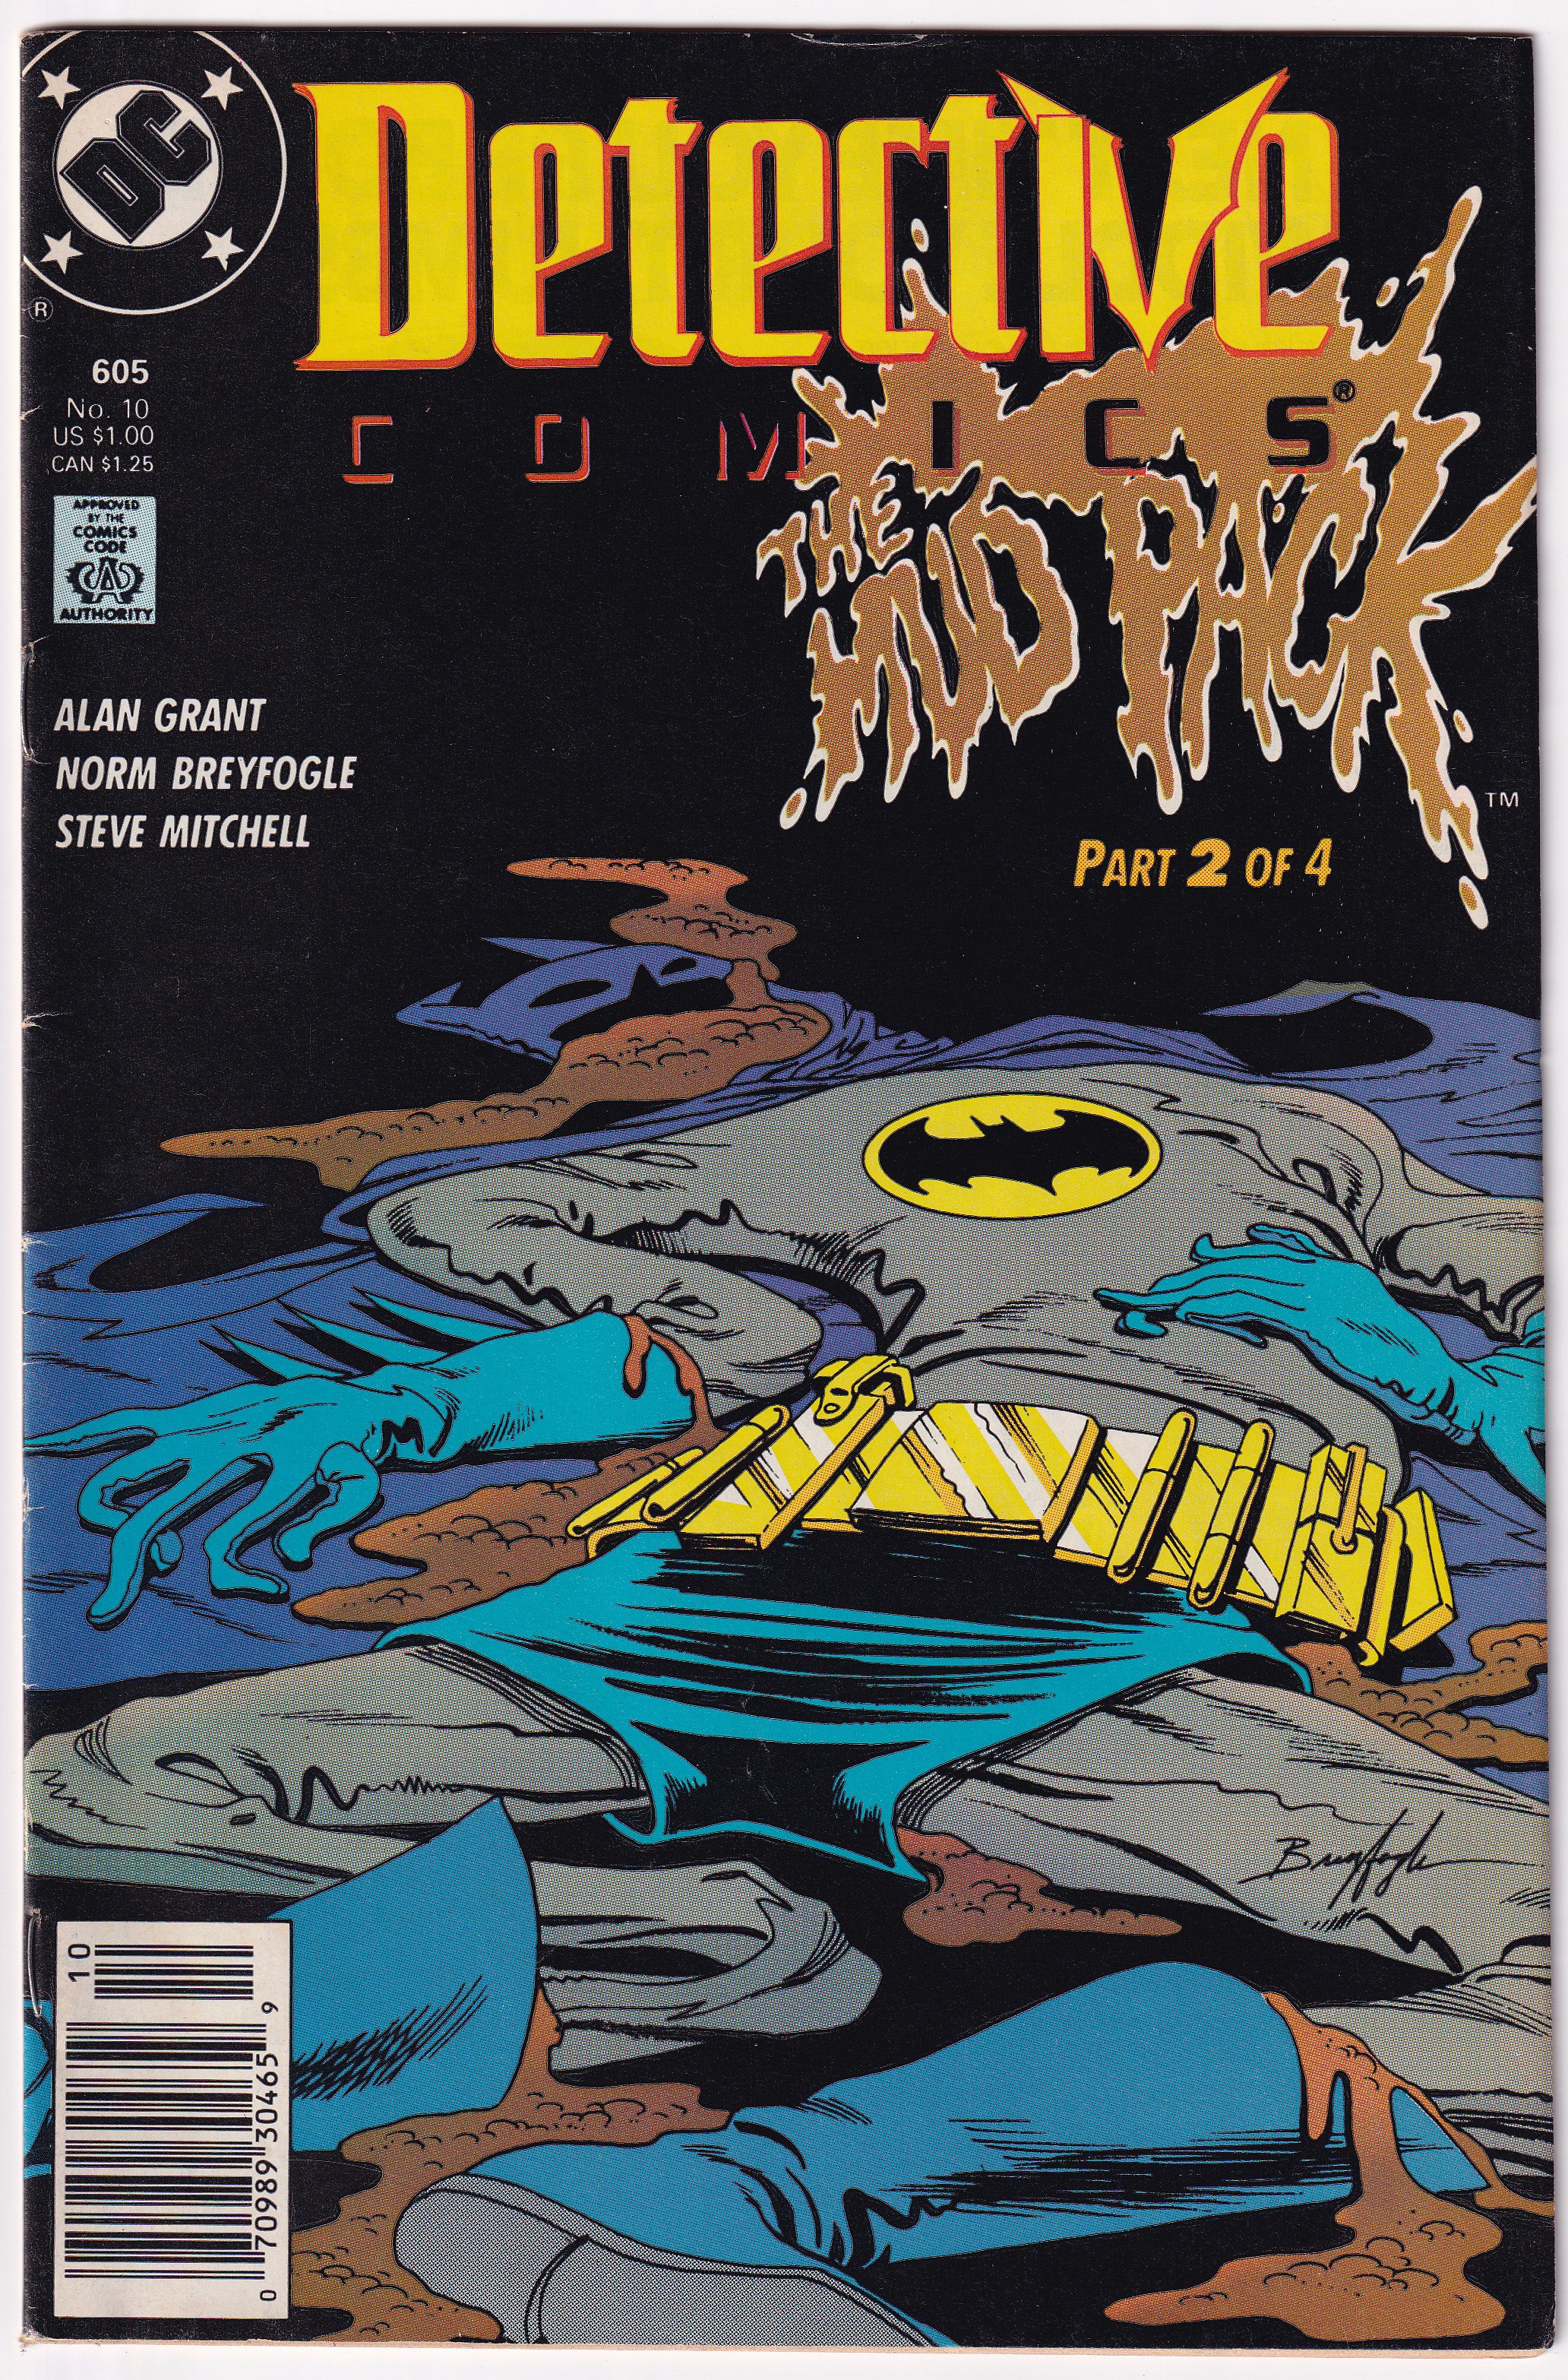 Photo of Detective Comics, Vol. 1 (1989)  Iss 605B Very Fine - comic sold by Stronghold Collectibles